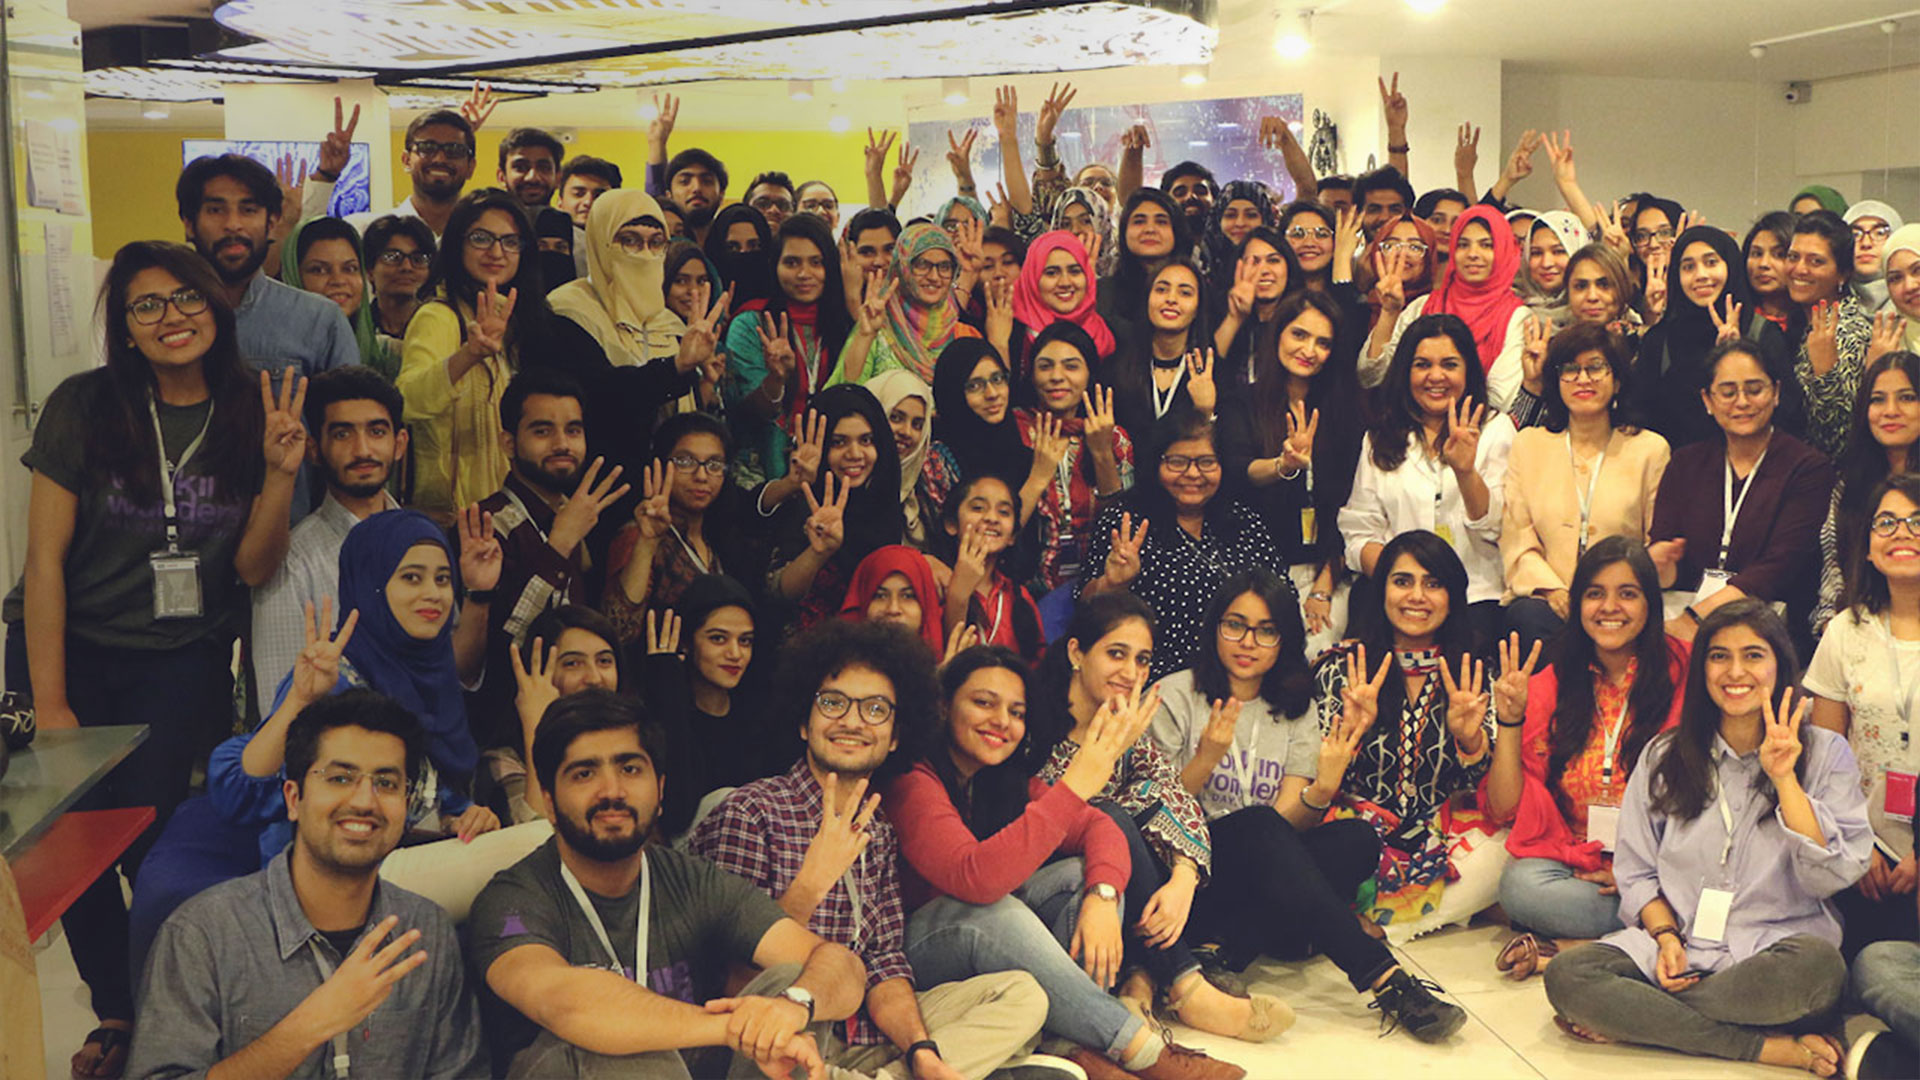 This startup incubator has mentored over 500 young entrepreneurs in three years